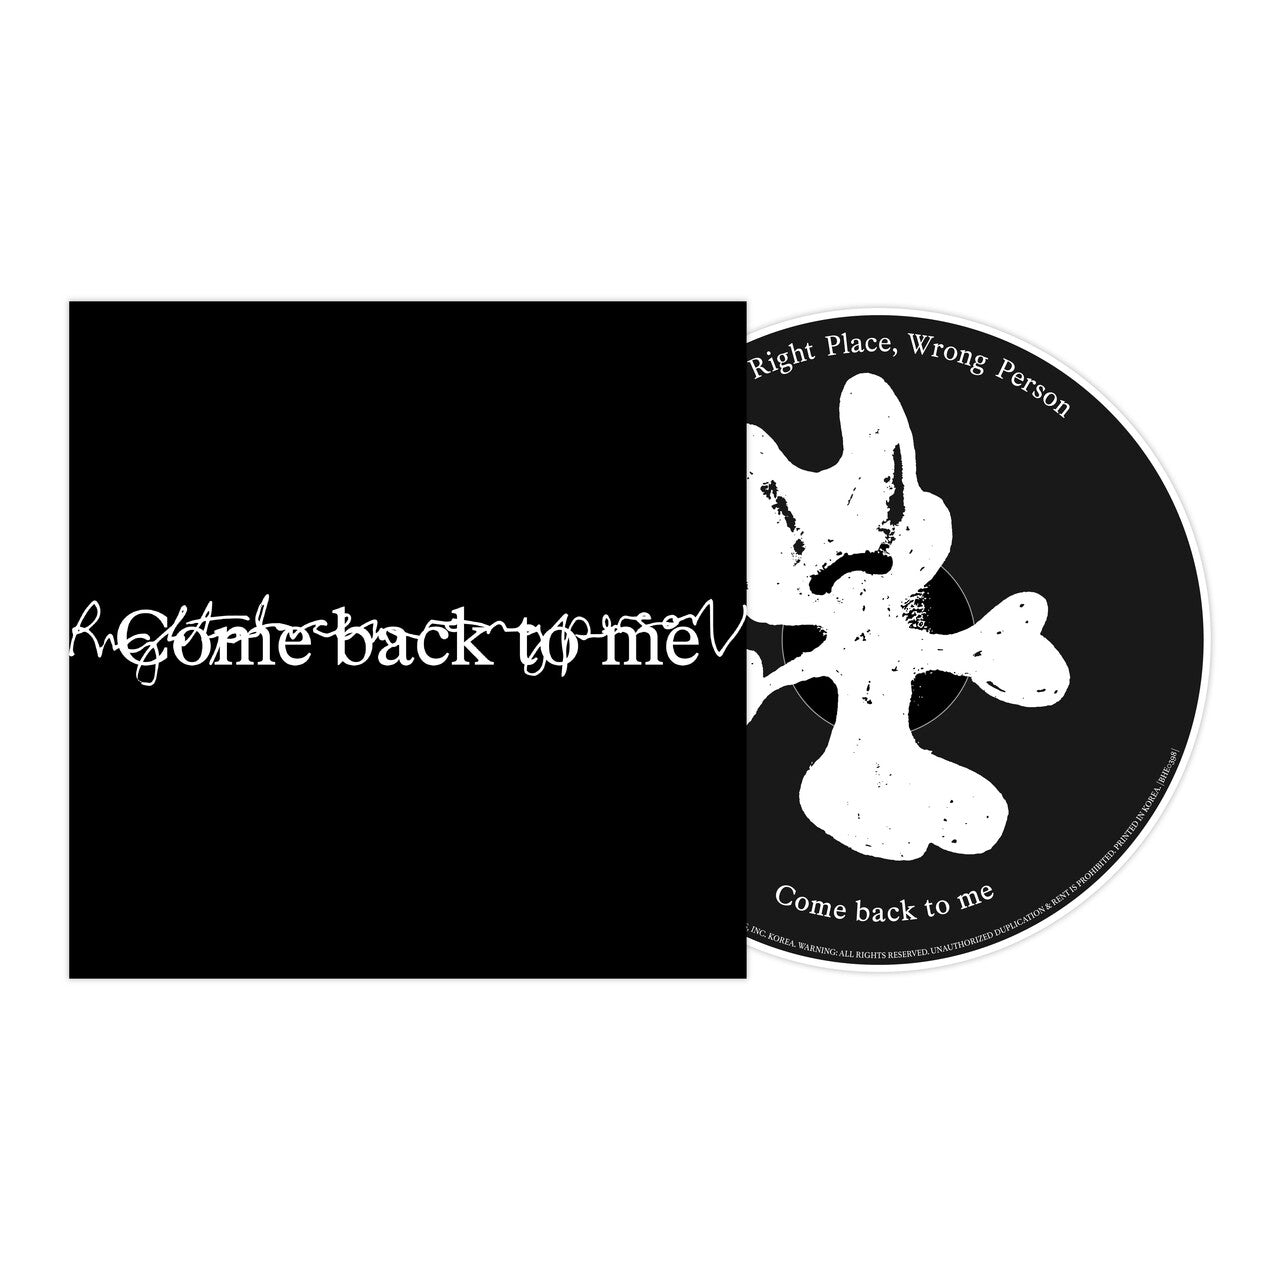 RM (BTS) - RM - Come back to me Single CD